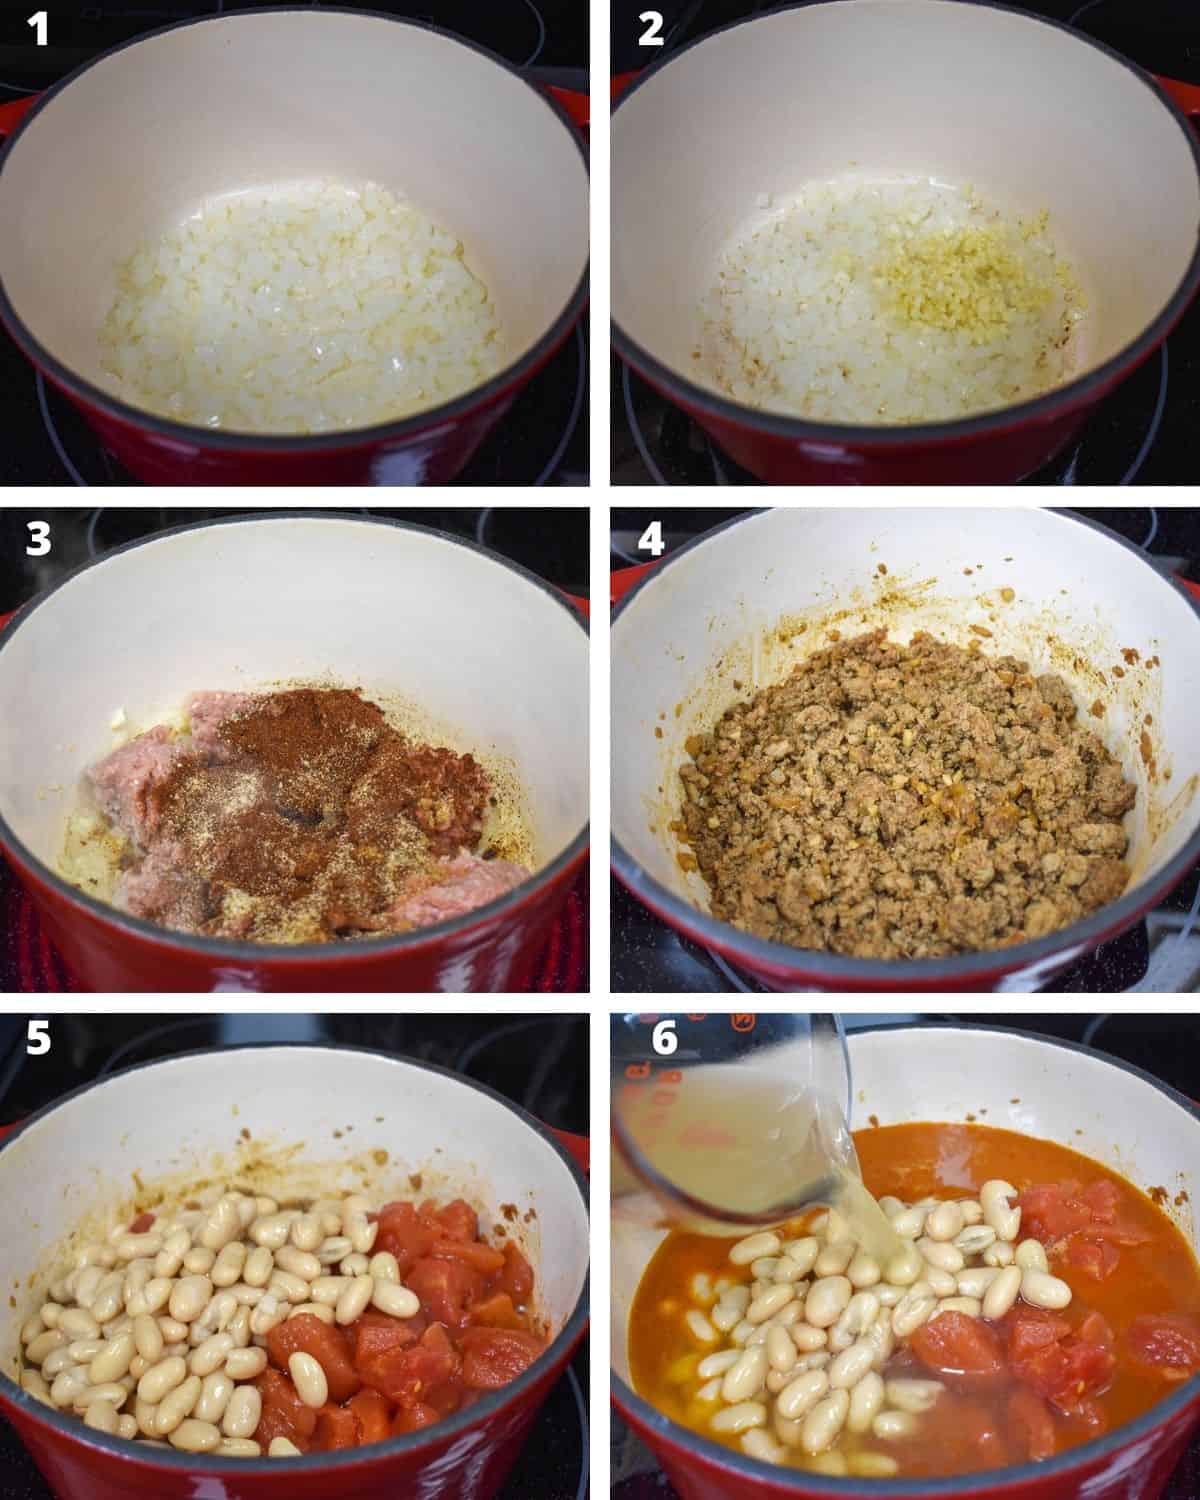 A collage of six images showing the steps to making the turkey chili.